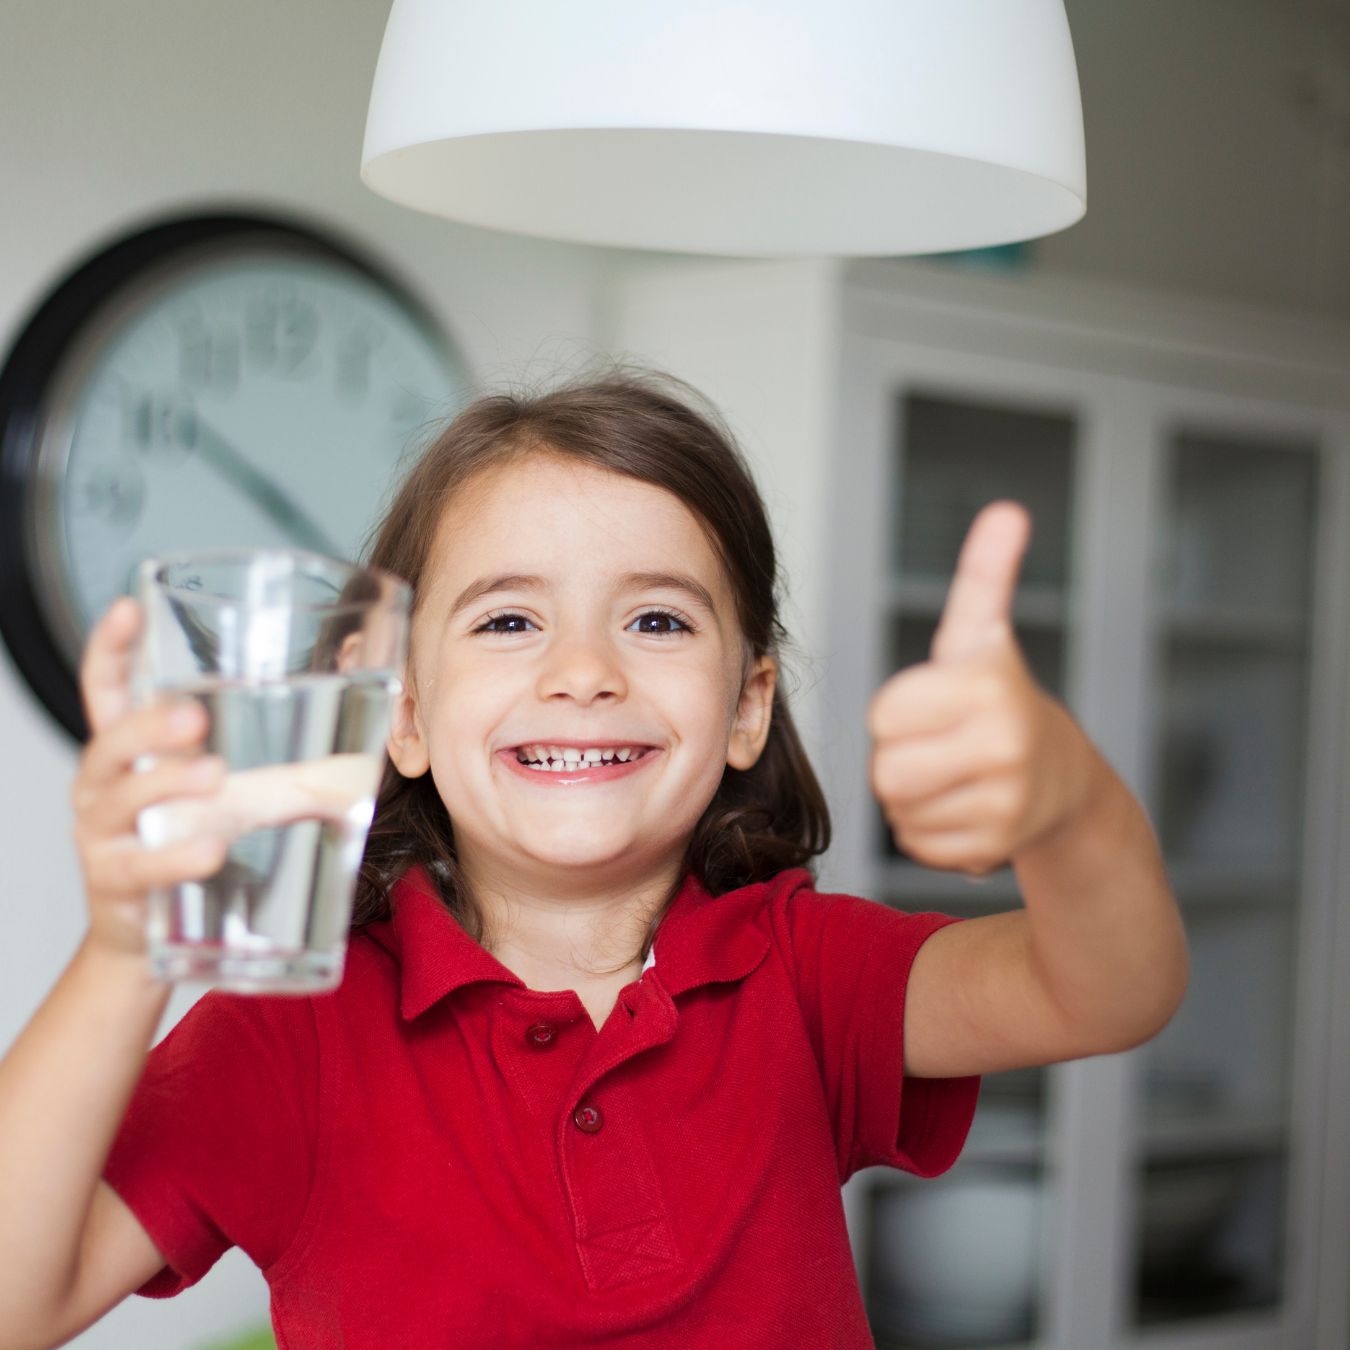 kid with glass of water